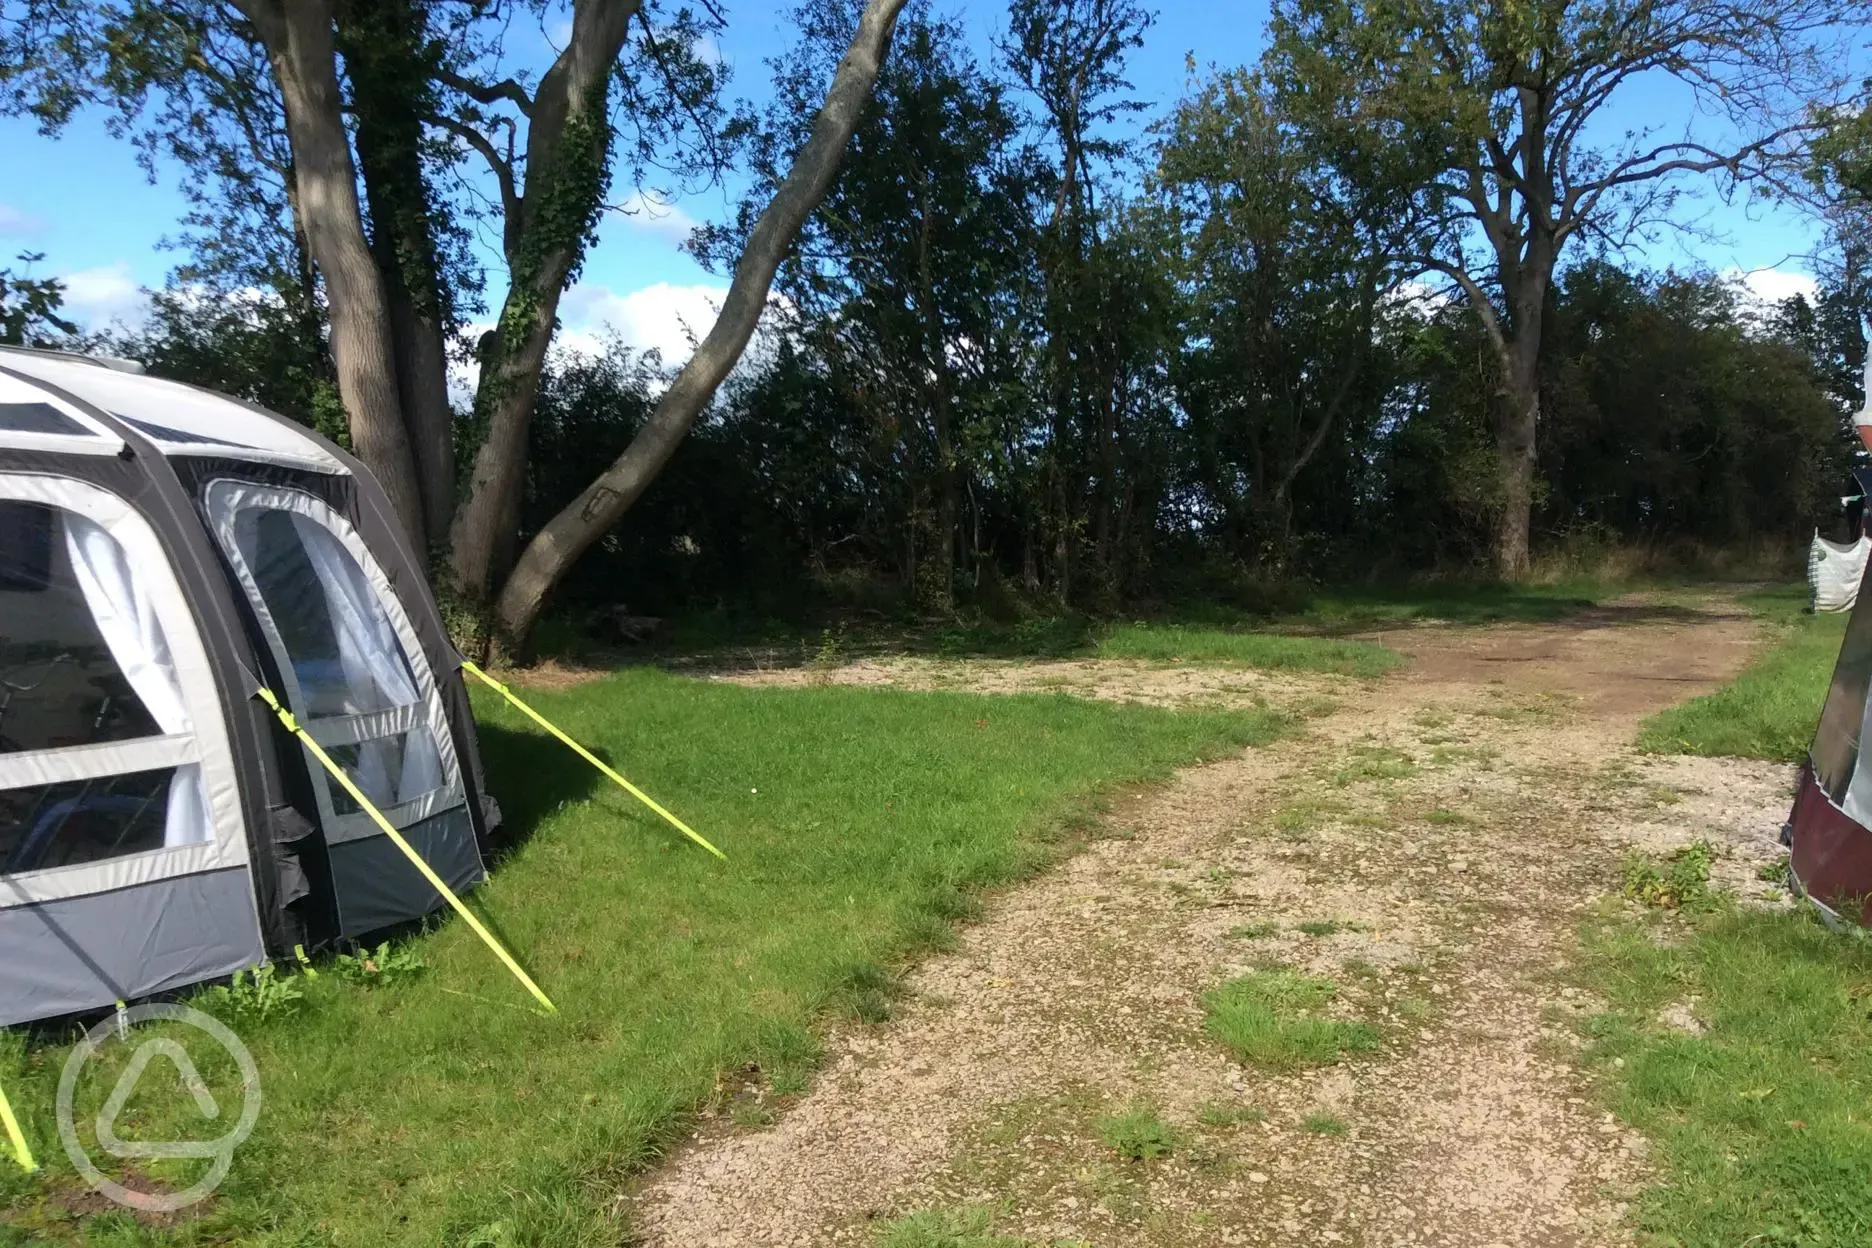 One of our pitches in the woods